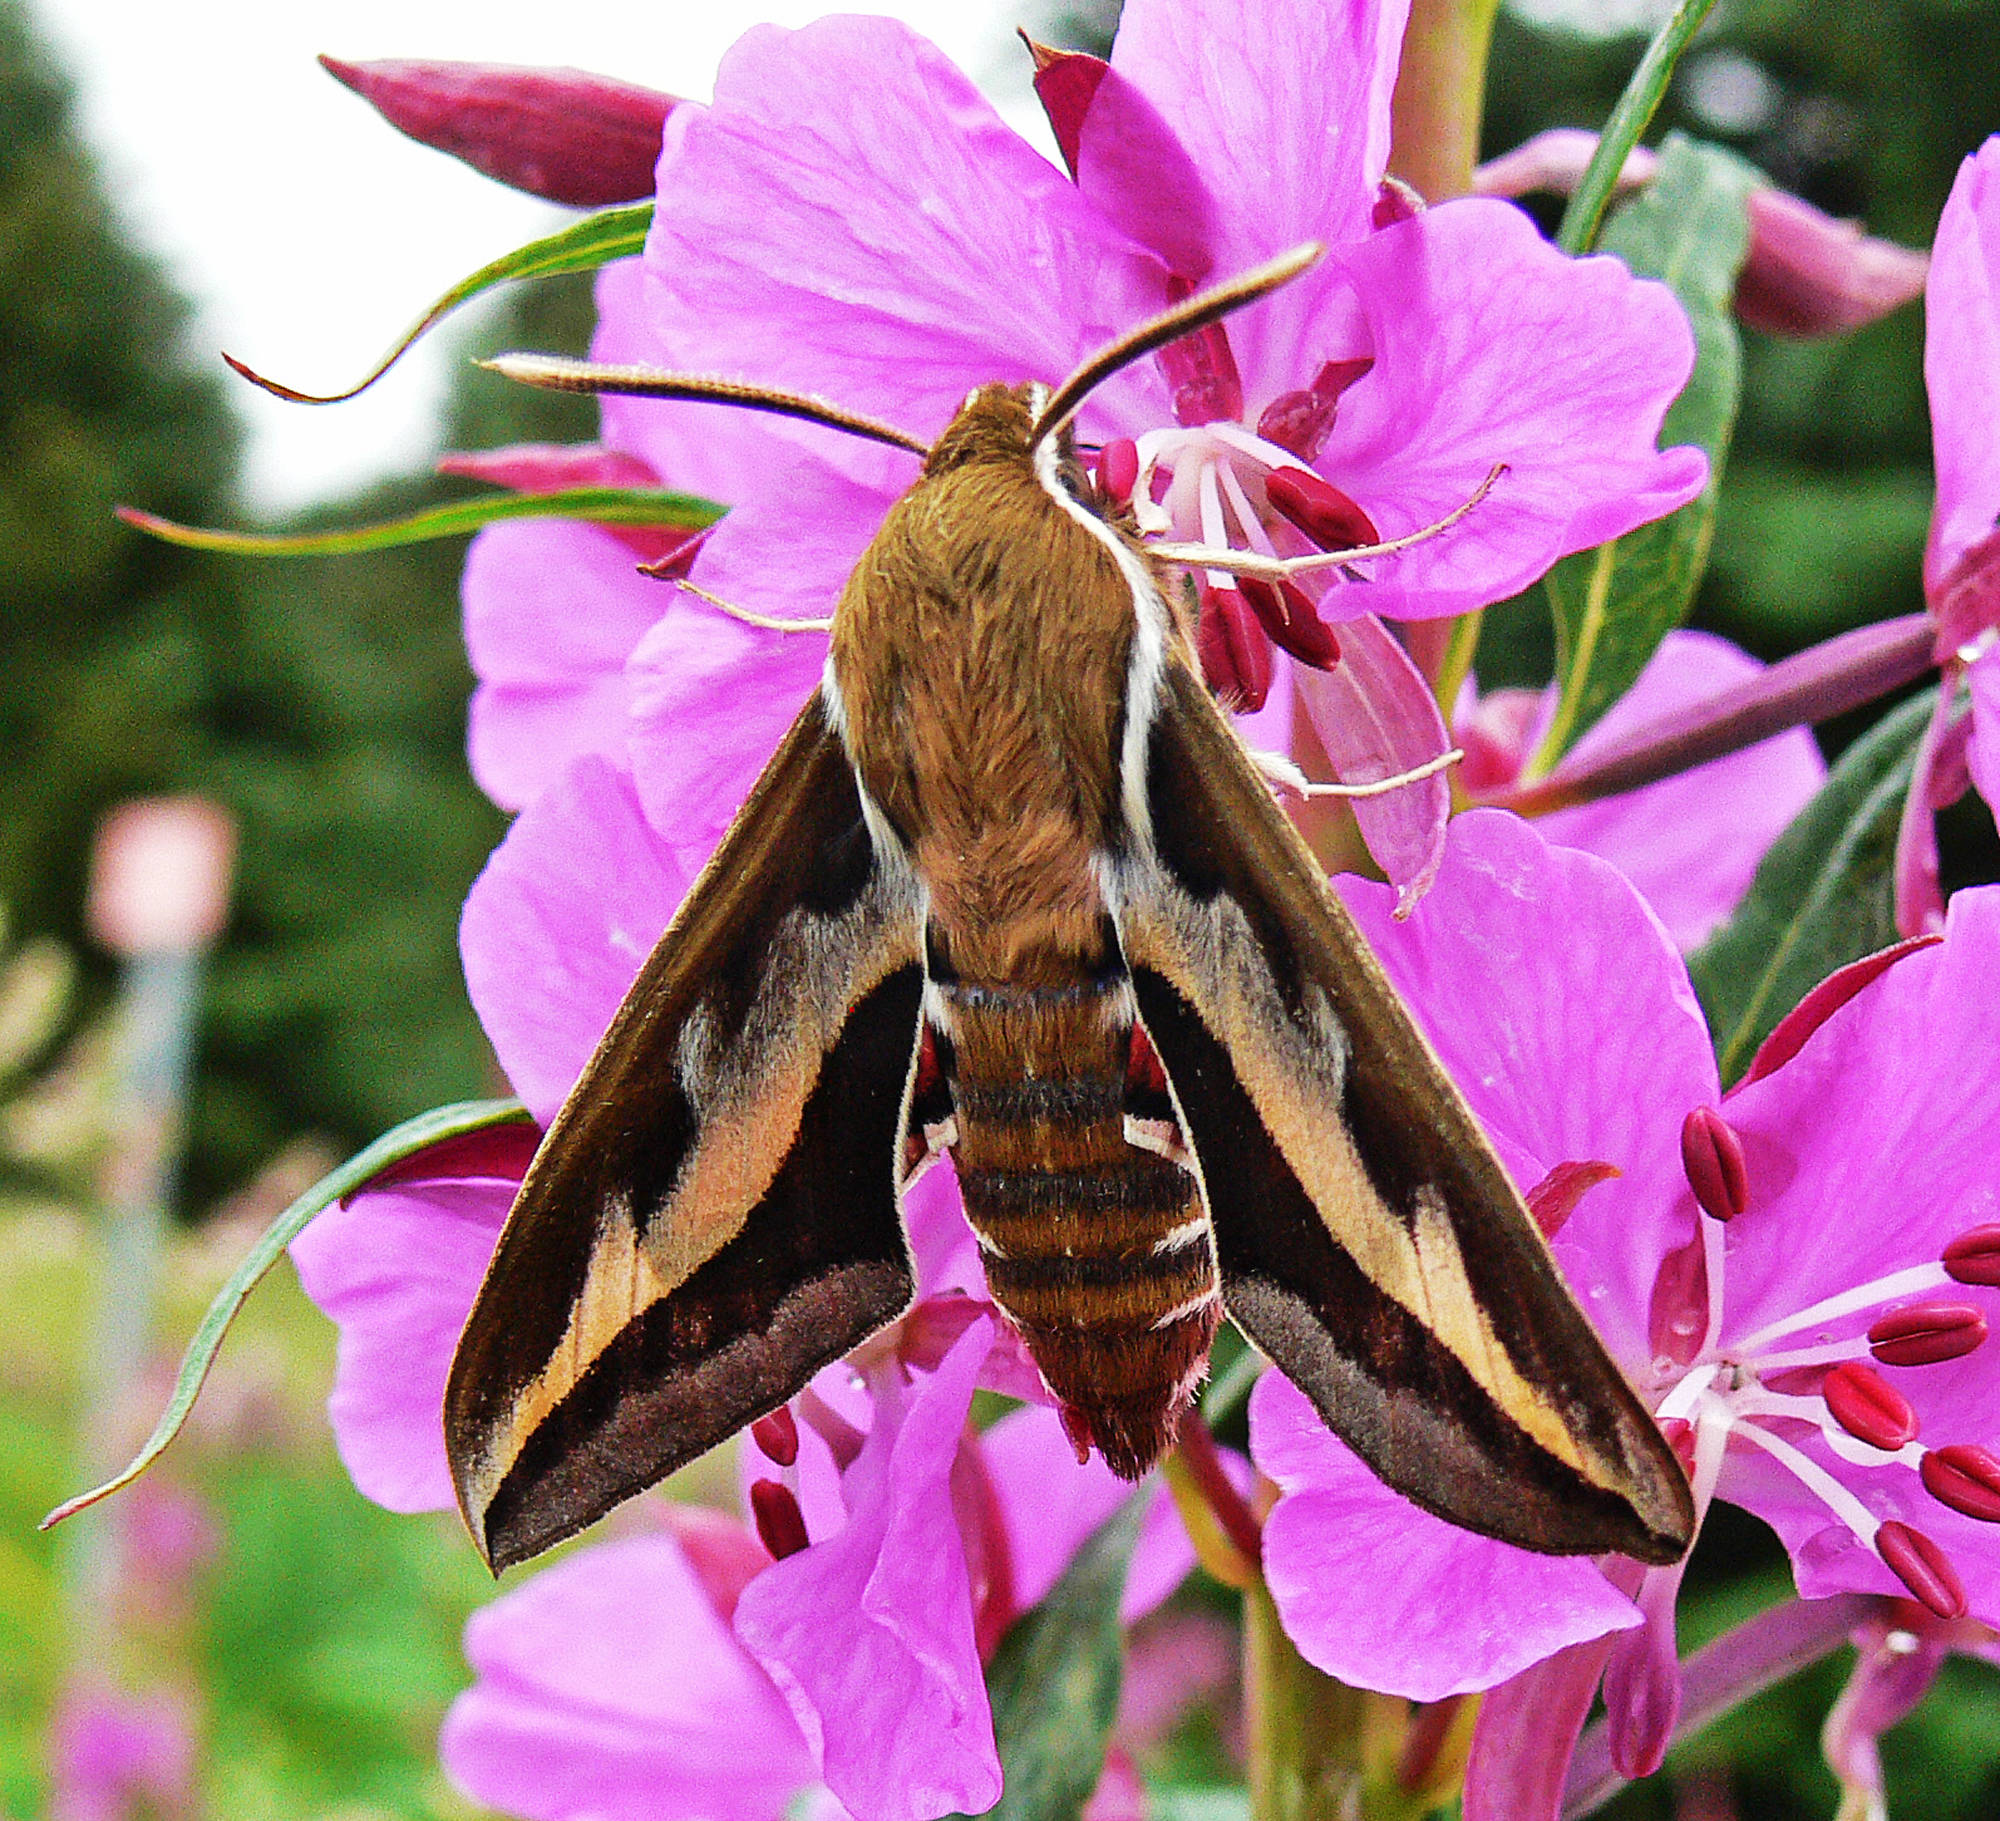 Many hawk moths have long proboscides suitable for extracting nectar from the long nectar spurs of certain flowers. (Courtesy photo | Bob Armstrong)